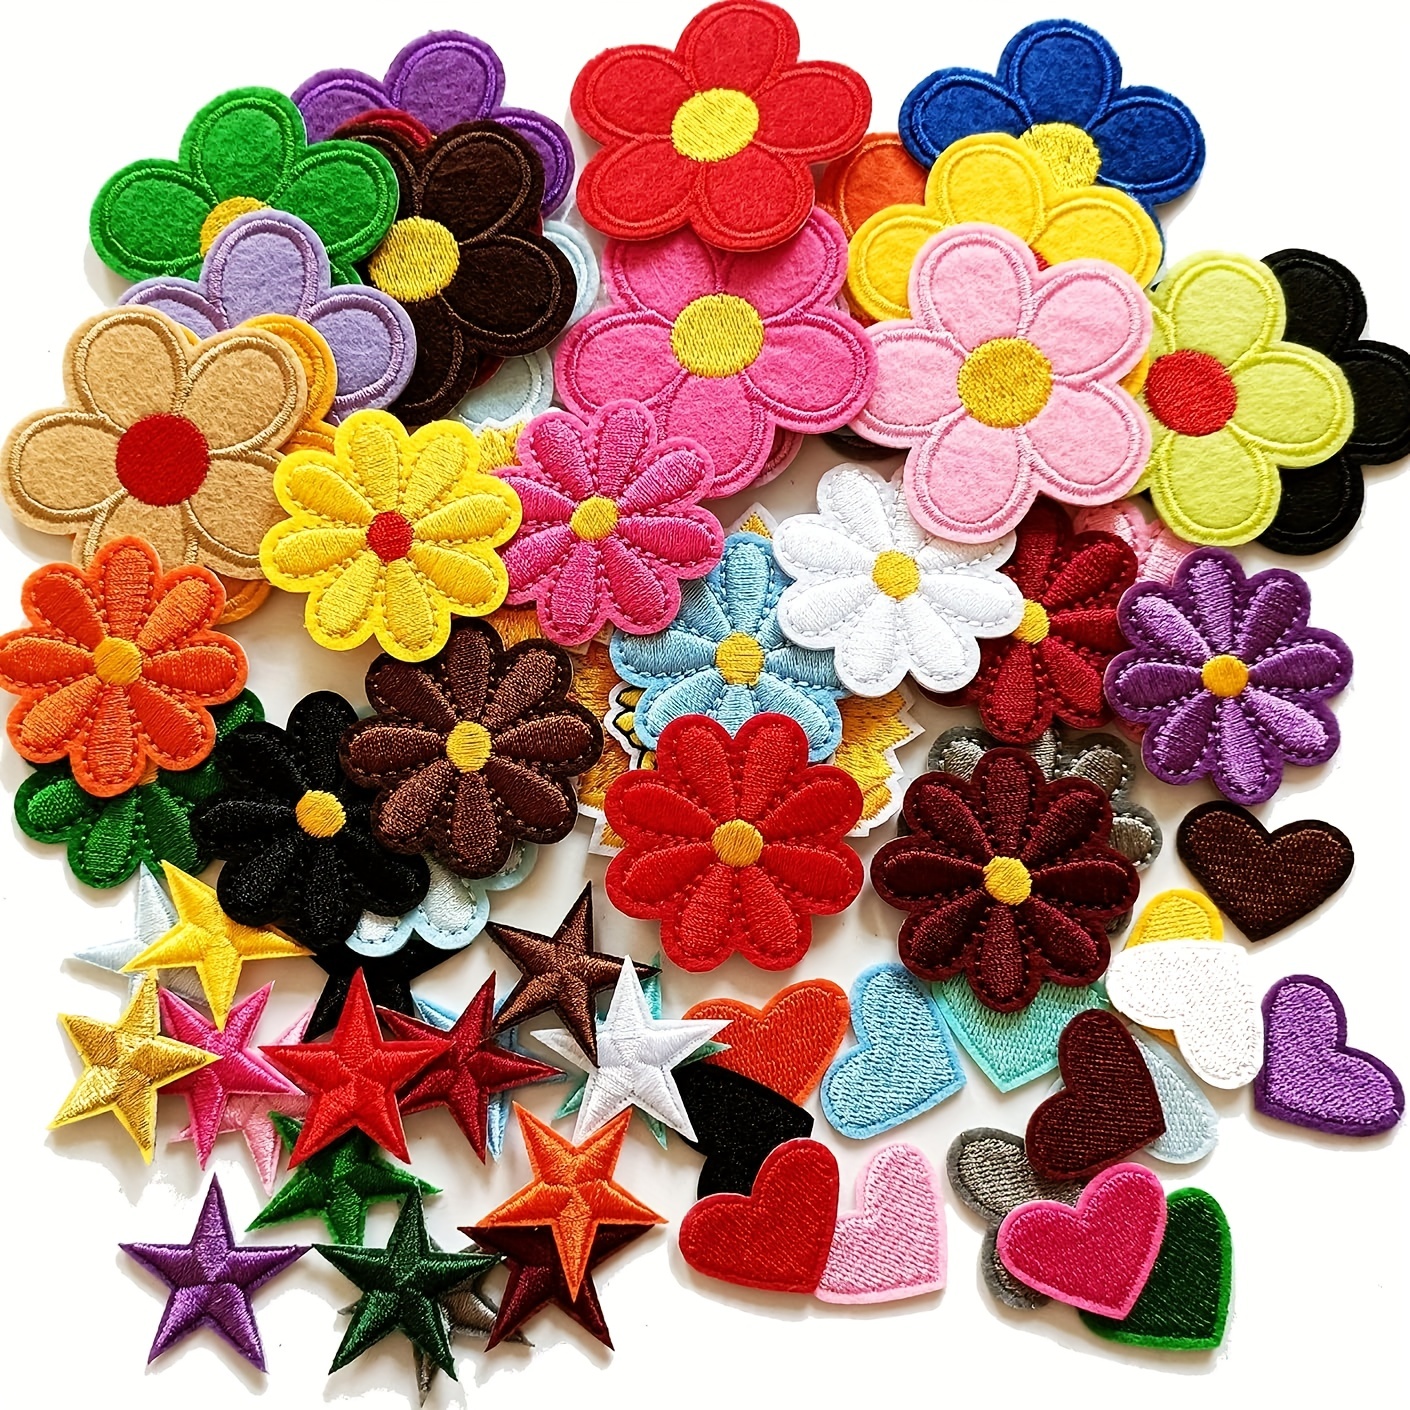 80pcs Random Assorted Iron on Patches, Cute Sew on / Iron on Embroidered Appliqu